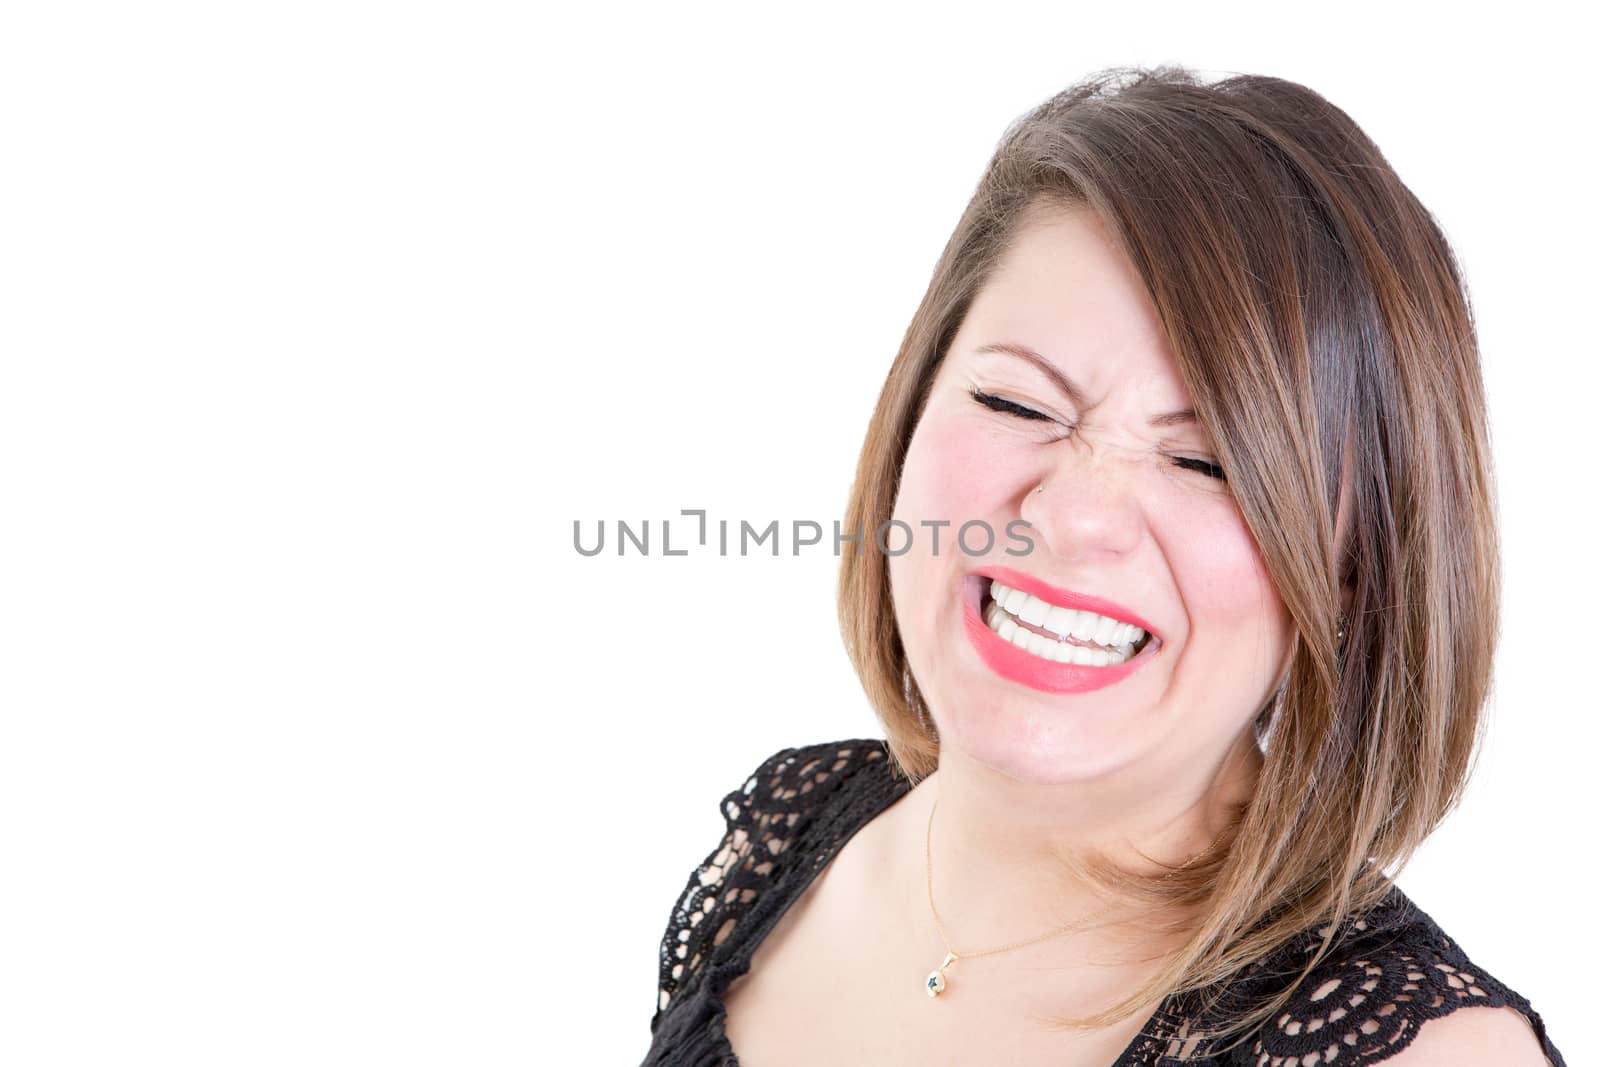 Close up Very Happy Woman Showing a Toothy Smile with Eyes Closed Against White Background with Copy Space on the Left.